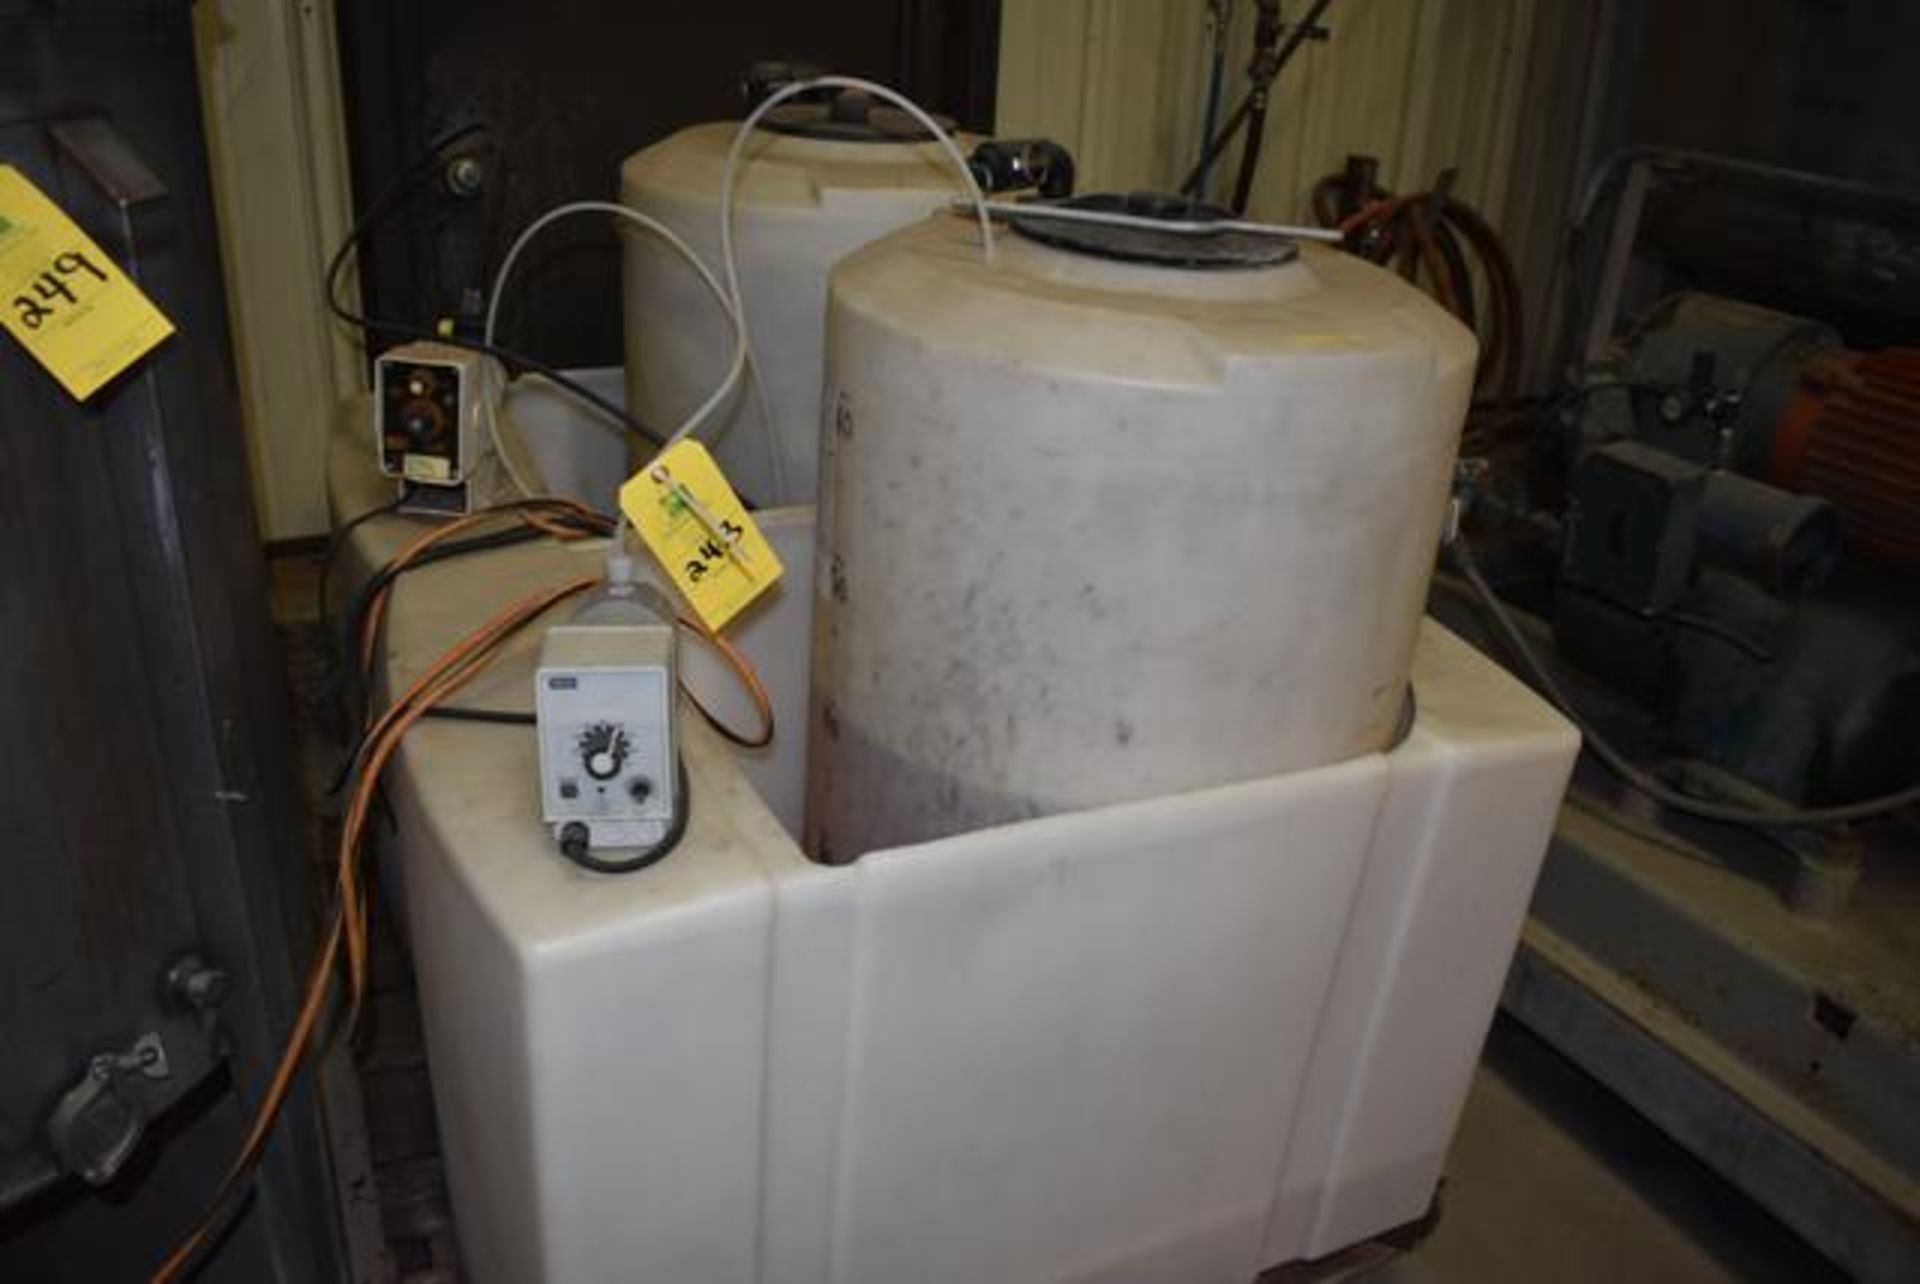 Chemical Process System Consisting of (2) RMI 60 Gal. Poly Tanks, (2) Pumps, RIGGING FEE: $50